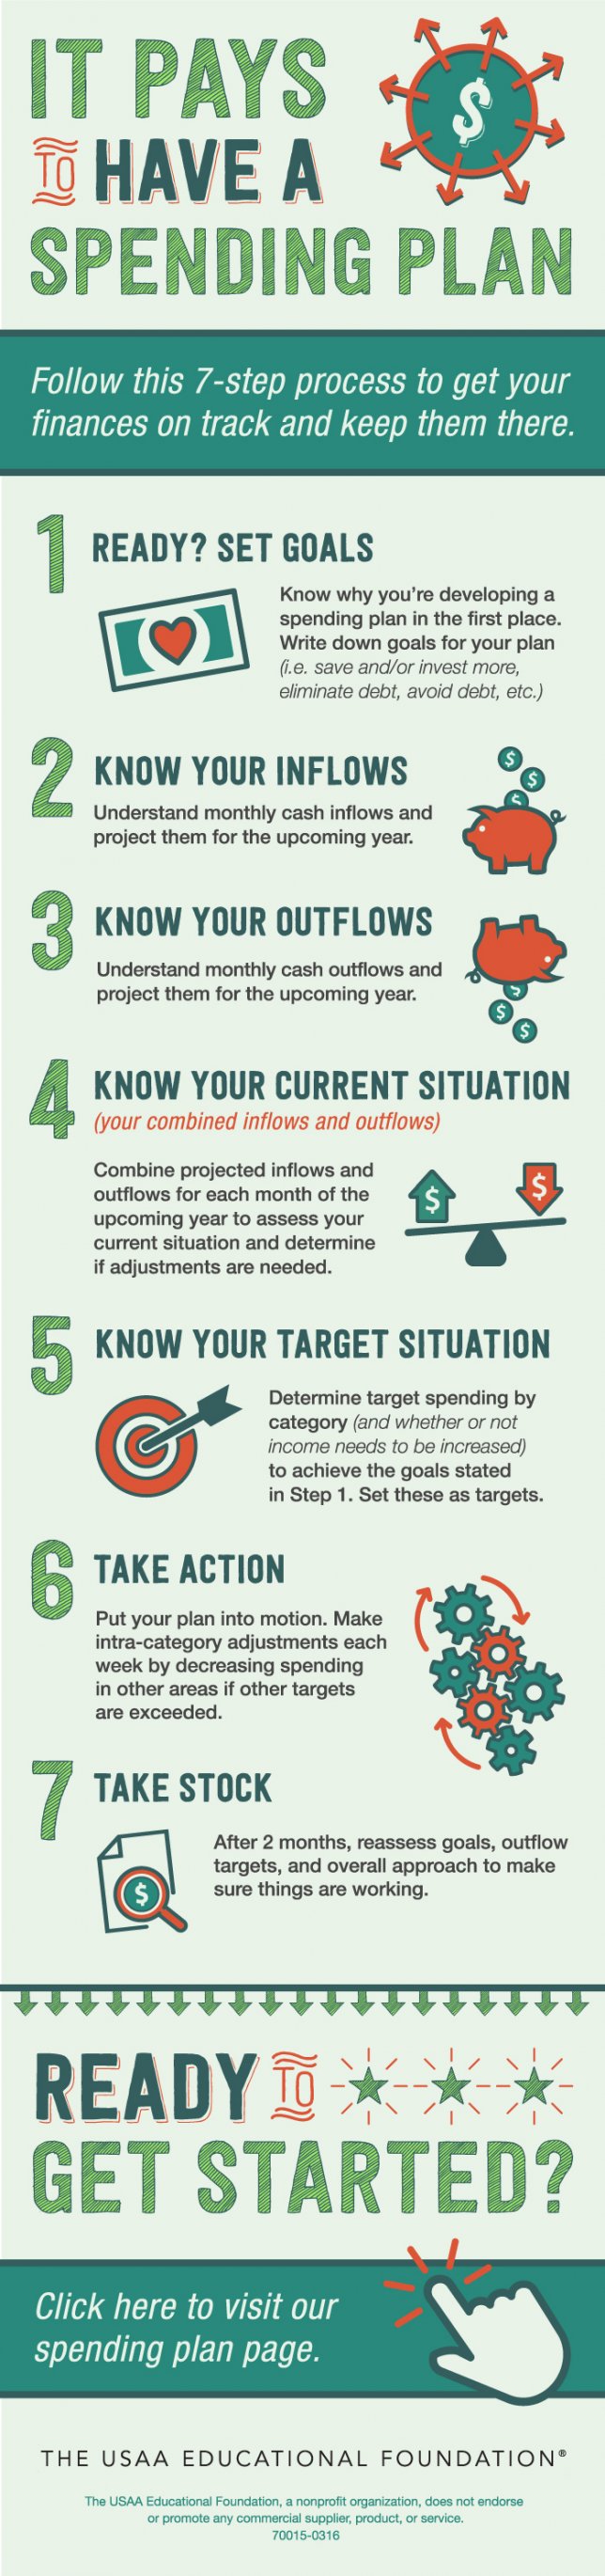 USAAEF_Infographic_SpendingPlan_OUTLINES_030416_page.jpg